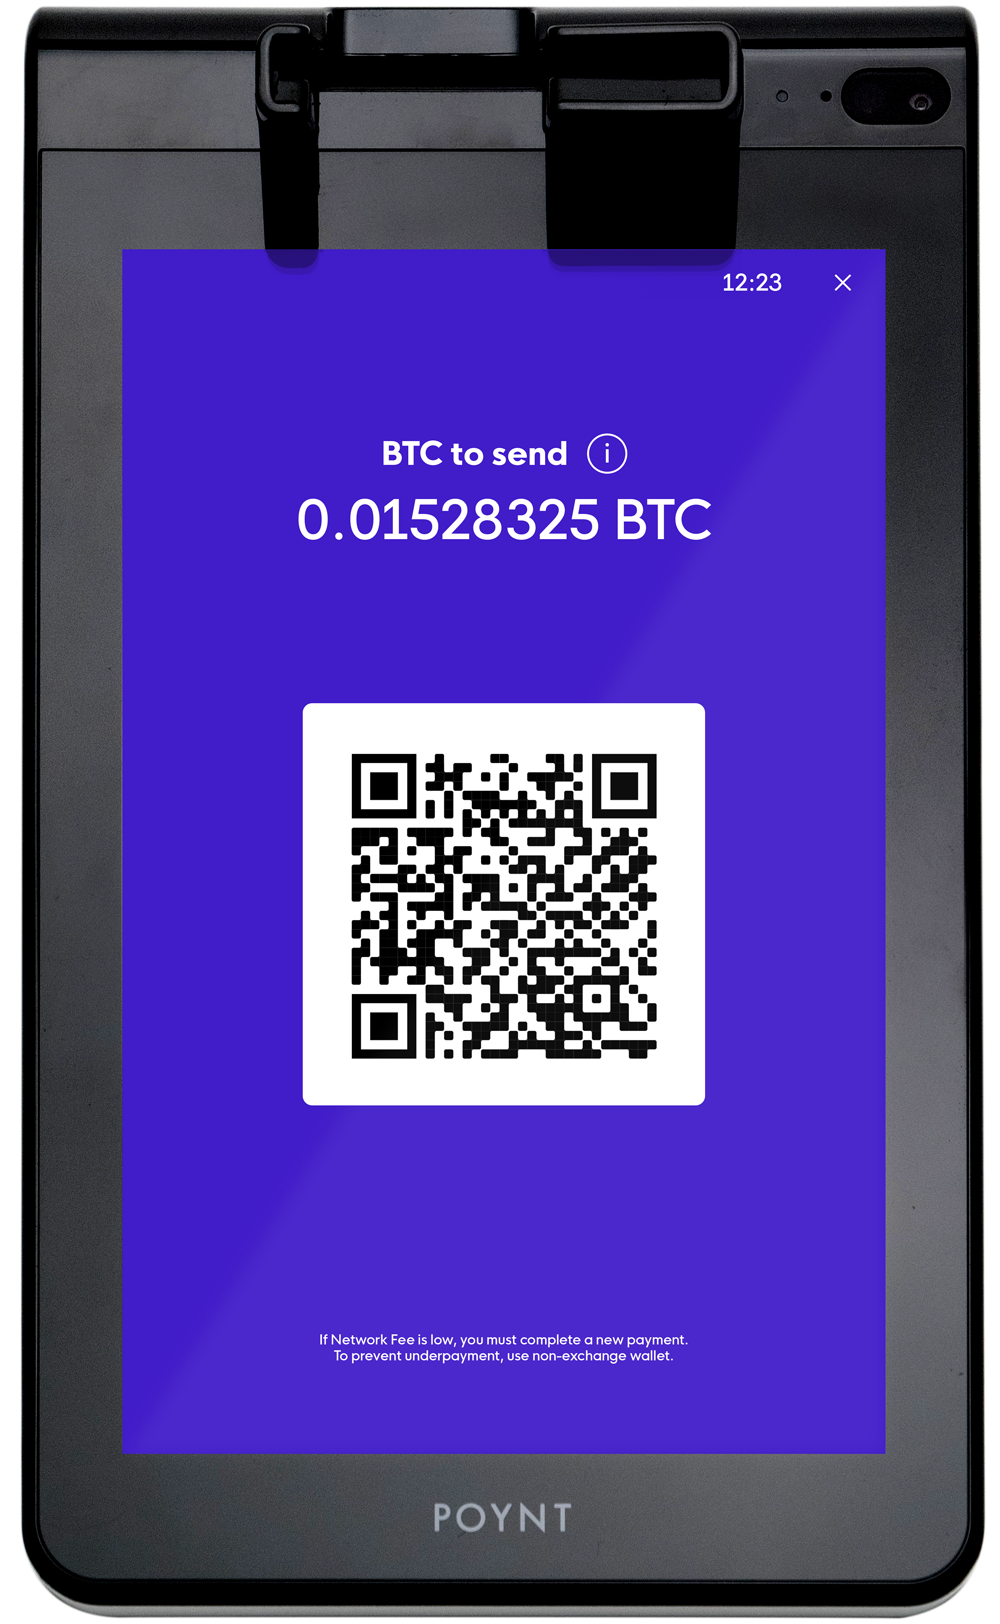 Illustration of a POYNT terminal displaying the QR code for a bitcoin transaction.